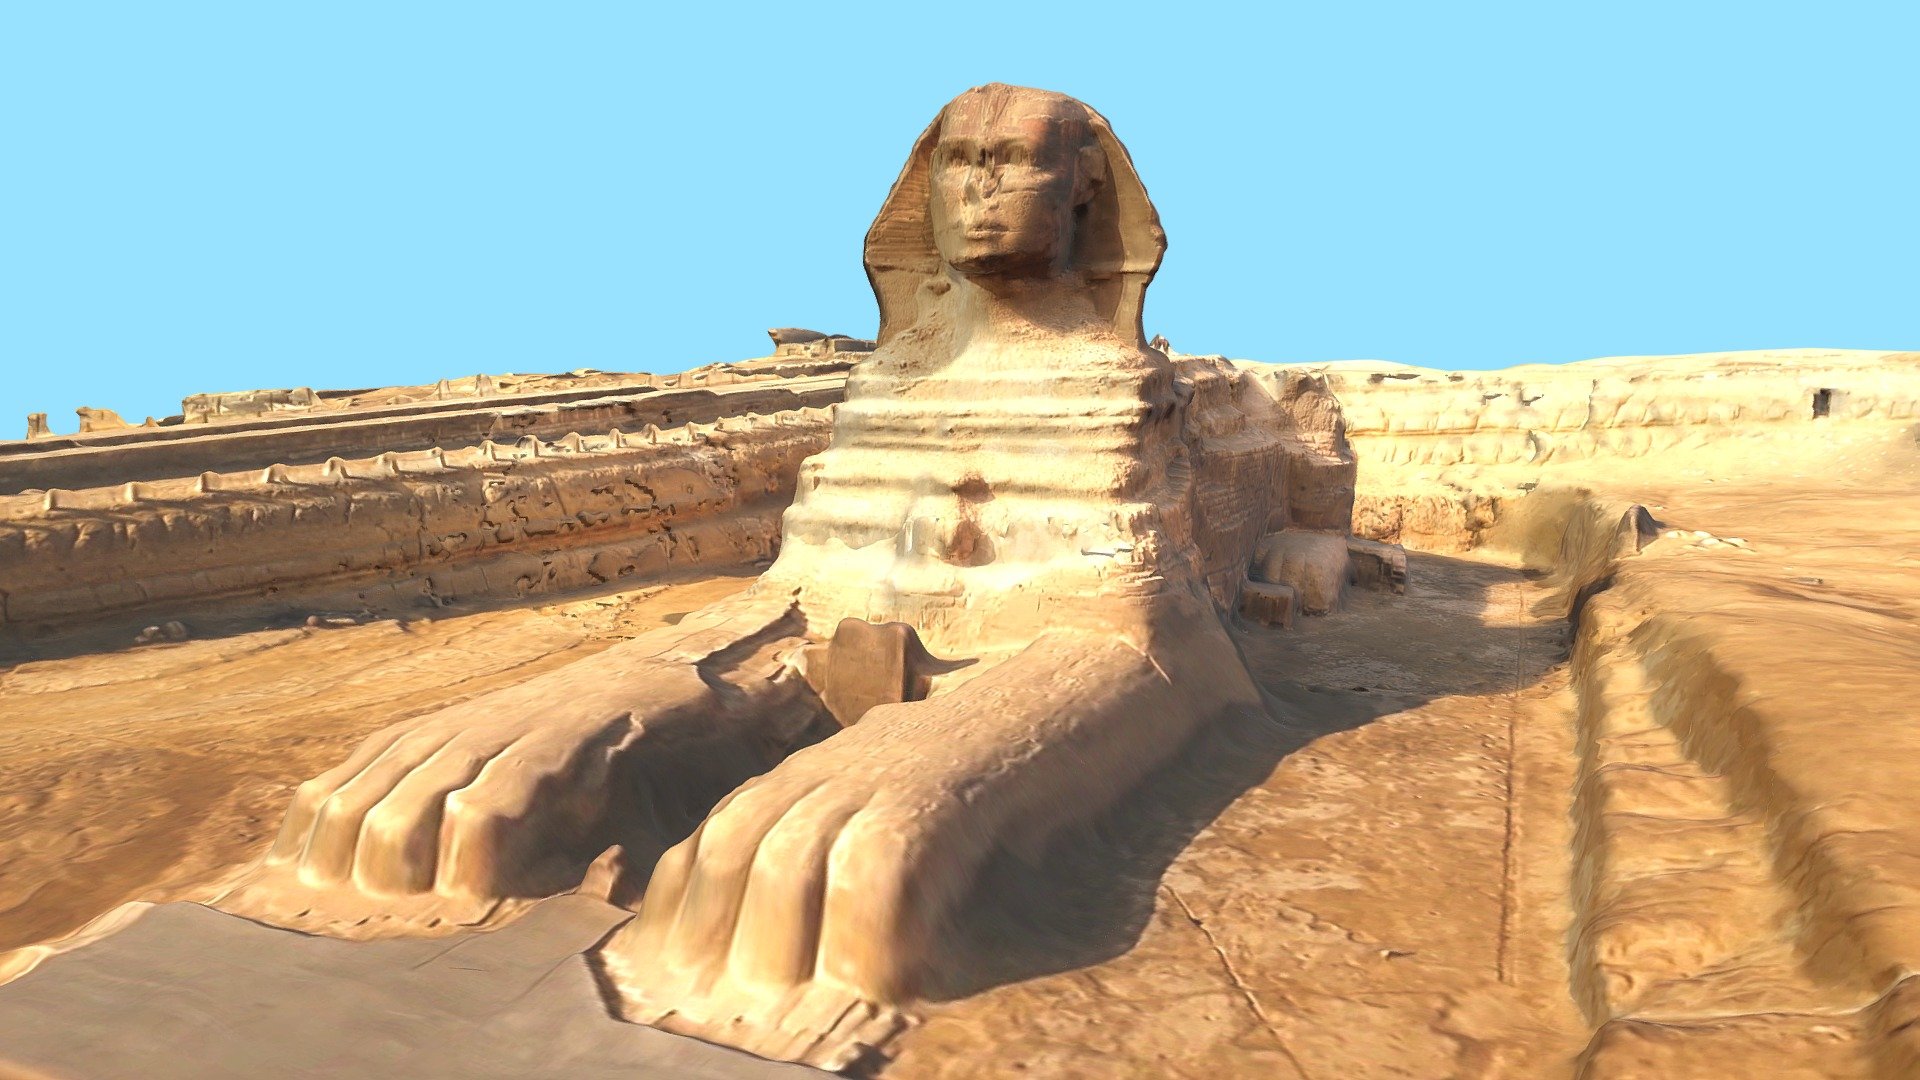 The Great Sphinx of Giza is a limestone statue of a reclining sphinx, a mythical creature with the head of a human, and the body of a lion. Facing directly from west to east, it stands on the Giza Plateau on the west bank of the Nile in Giza, Egypt. The face of the Sphinx appears to represent the pharaoh Khafre.

The original shape of the Sphinx was cut from the bedrock, and has since been restored with layers of limestone blocks. It measures 73 m (240 ft) long from paw to tail, 20 m (66 ft) high from the base to the top of the head and 19 m (62 ft) wide at its rear haunches. Its nose was broken off for unknown reasons between the 3rd and 10th centuries AD.

The Sphinx is the oldest known monumental sculpture in Egypt and one of the most recognisable statues in the world. The archaeological evidence suggests that it was created by ancient Egyptians of the Old Kingdom during the reign of Khafre (c. 2558–2532 BC).
Source: Wikipedia.org - Great Sphinx of Giza ابو الهول Cairo, Egypt - Buy Royalty Free 3D model by LibanCiel 3d model